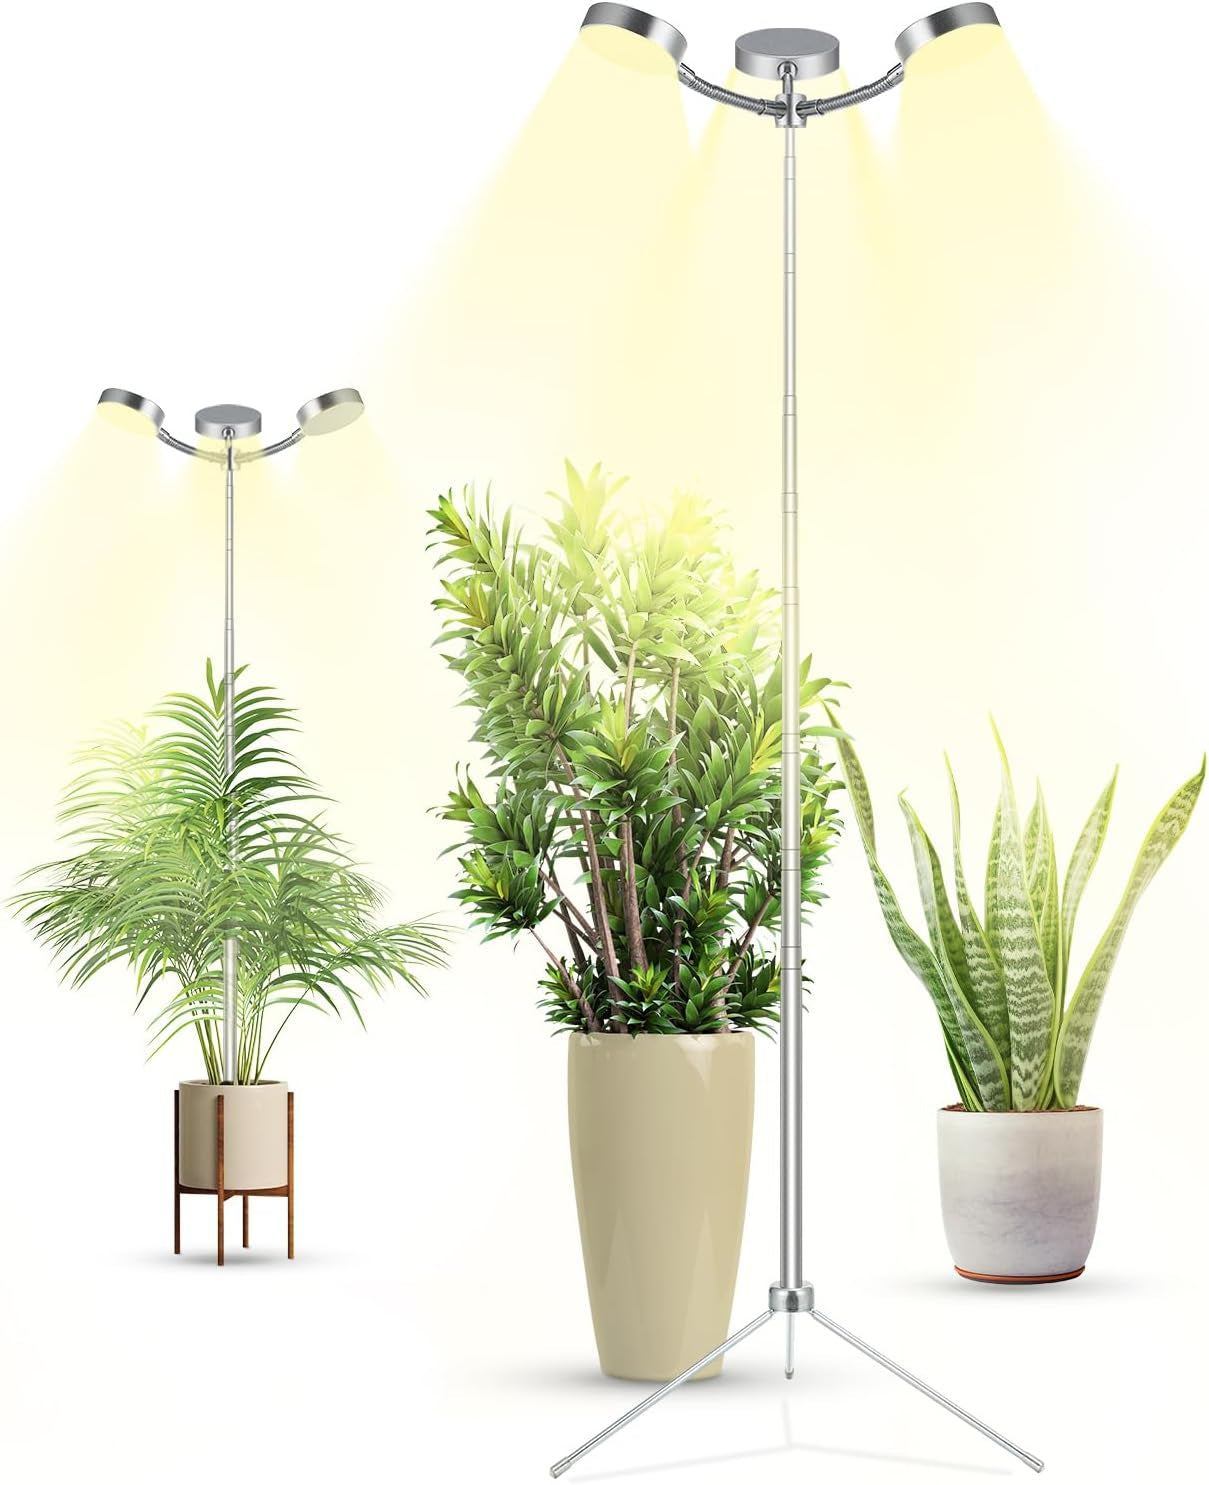 Grow Lights Full Spectrum with Detachable Tripod Stand, Multi-Functional 10-55 Inches Height Adjustab Stand and Desktop Plant Growing Lights for Indoor Large Small Plants with Auto On/Off Timer